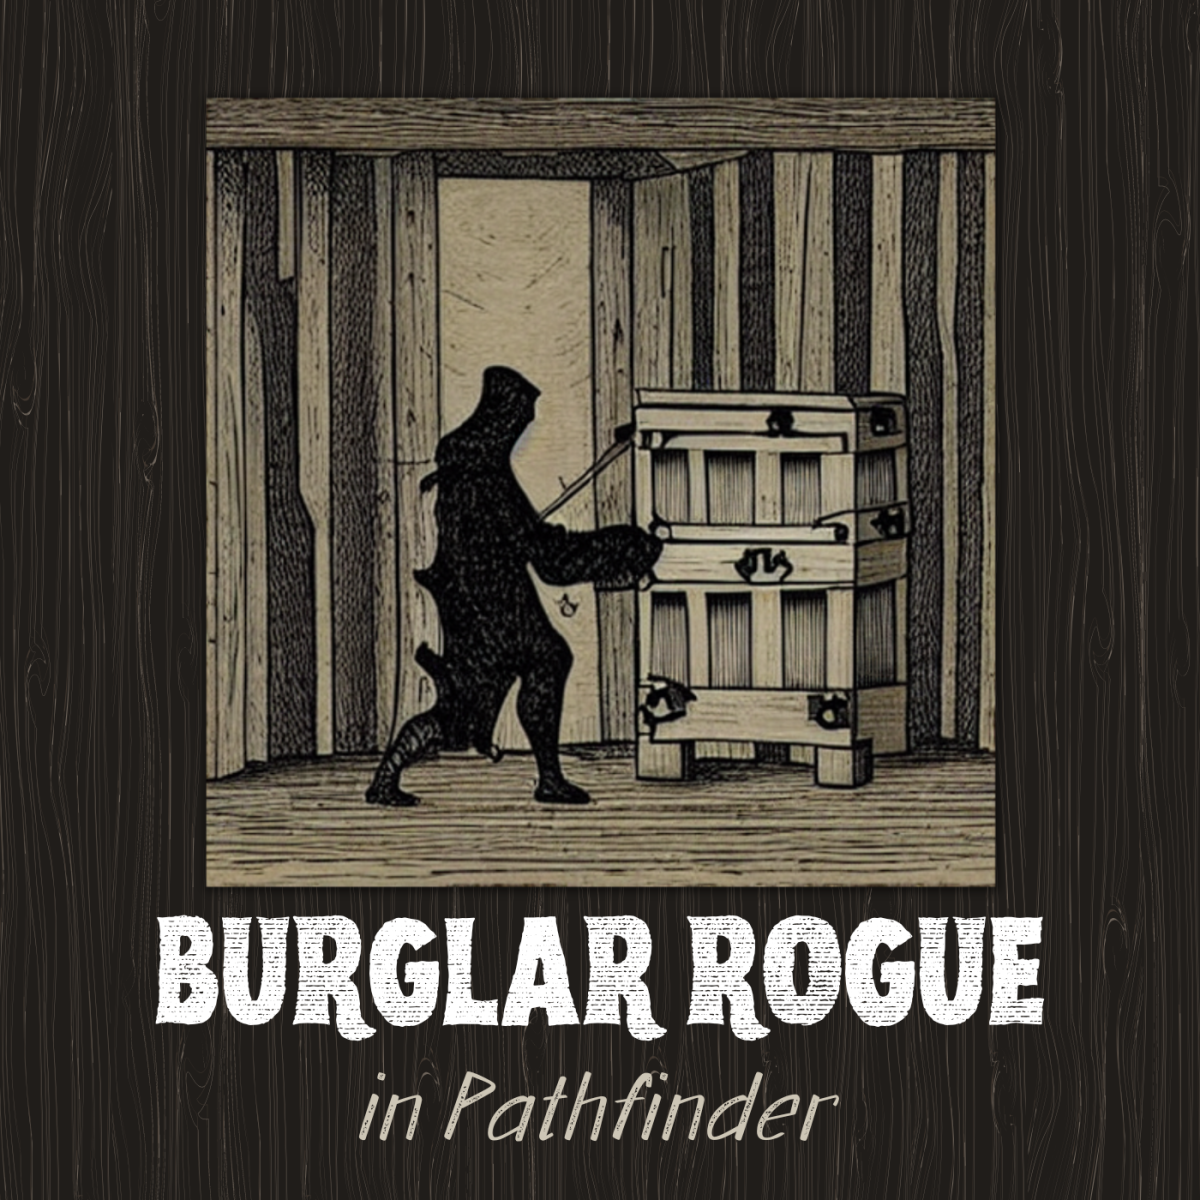 A Guide to the Burglar Rogue in 